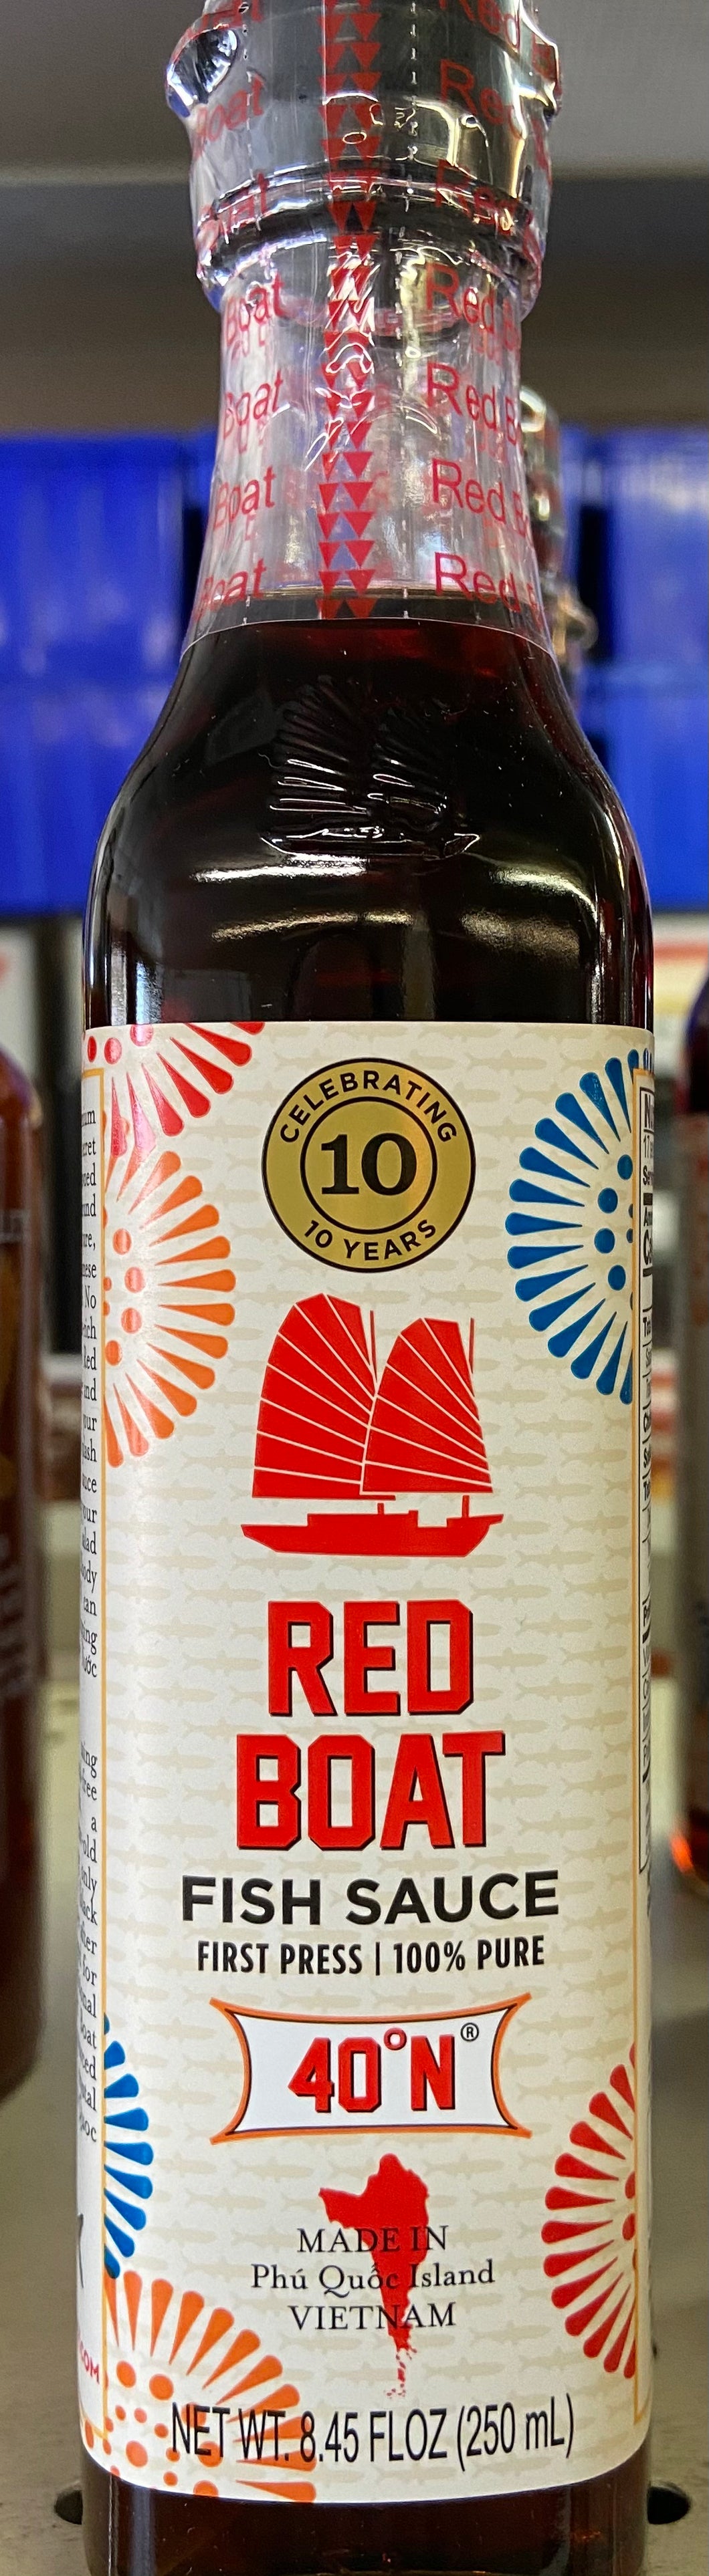 Fish Sauce, Red Boat